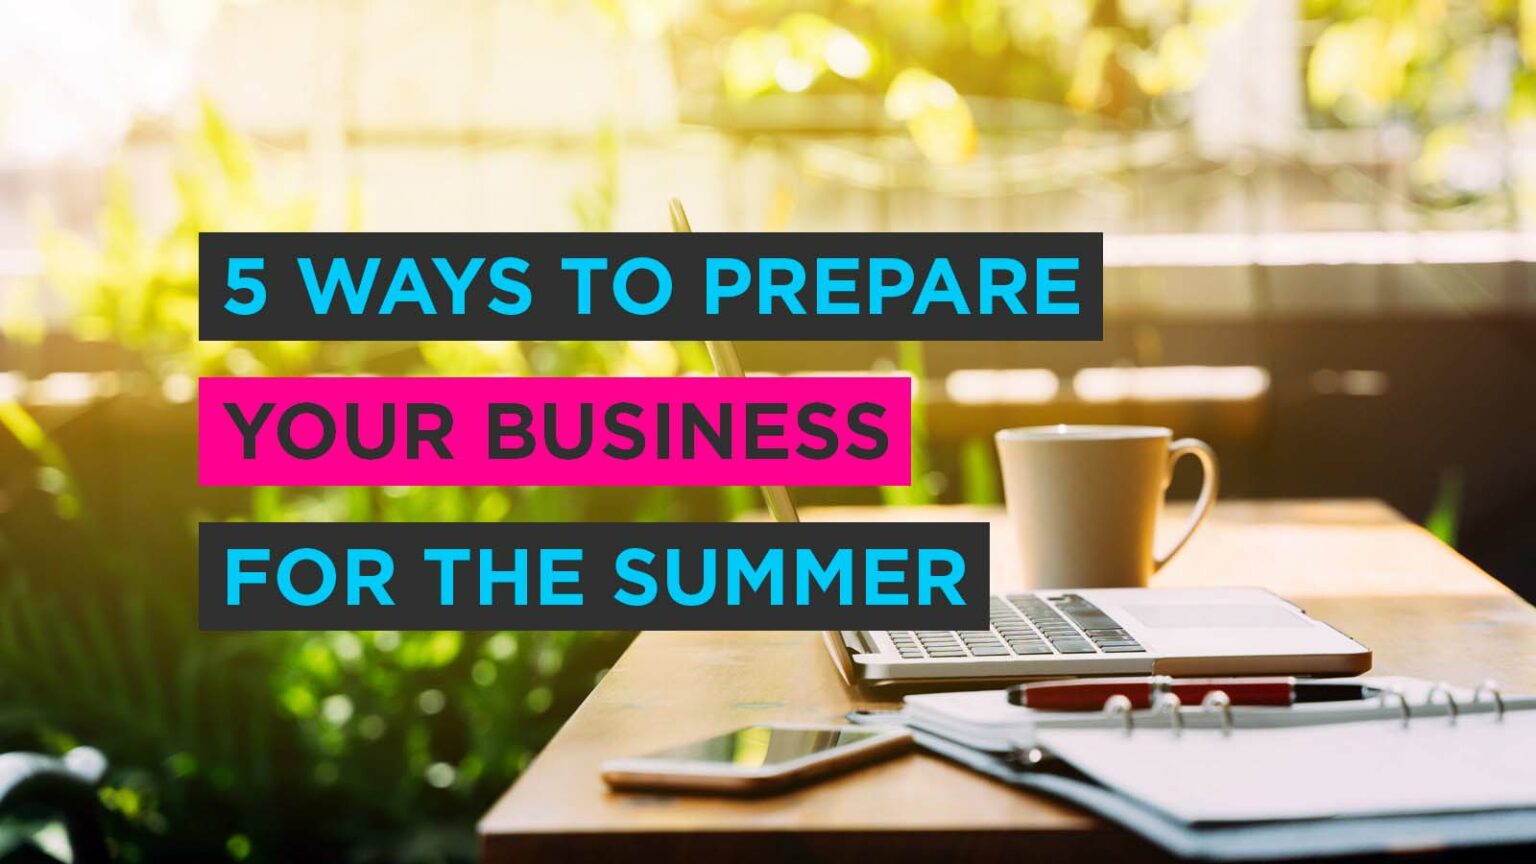 5 Ways to Prepare your Business for the Summer 